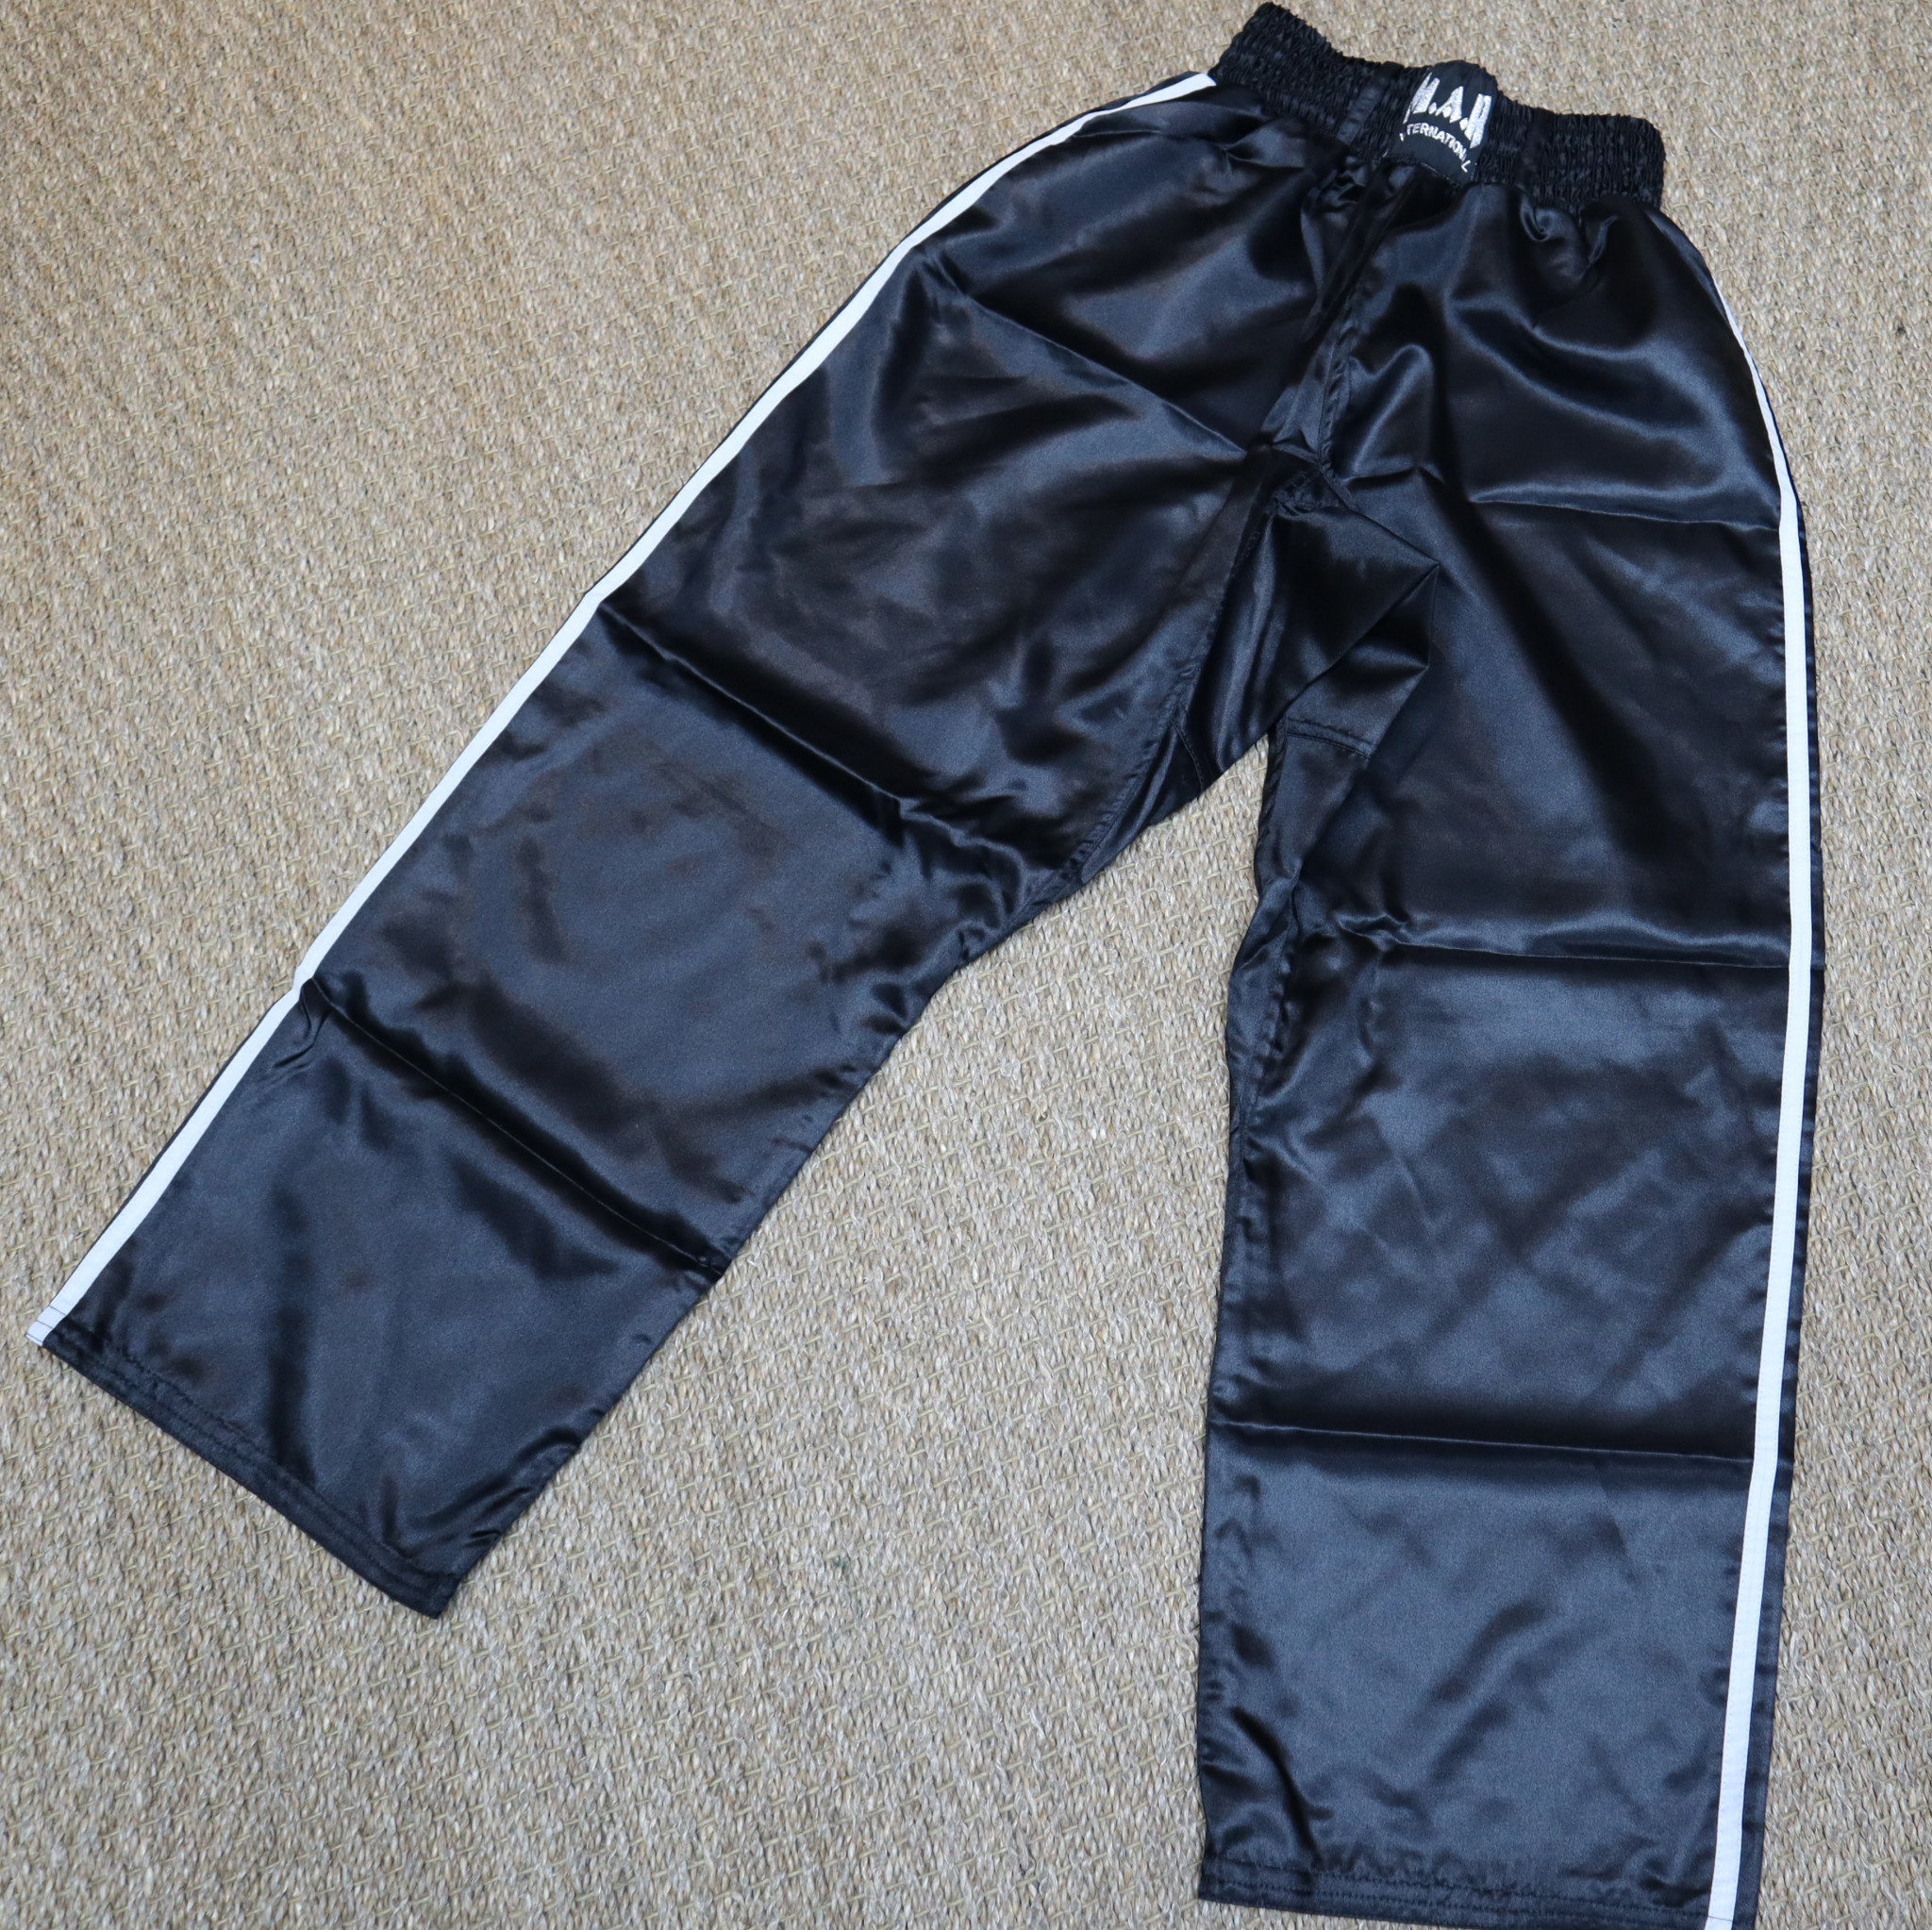 Comes with Woven Star Stripe Design M.A.R International Black Kickboxing/Karate Trousers with Polyester Silk Satin Fabric 